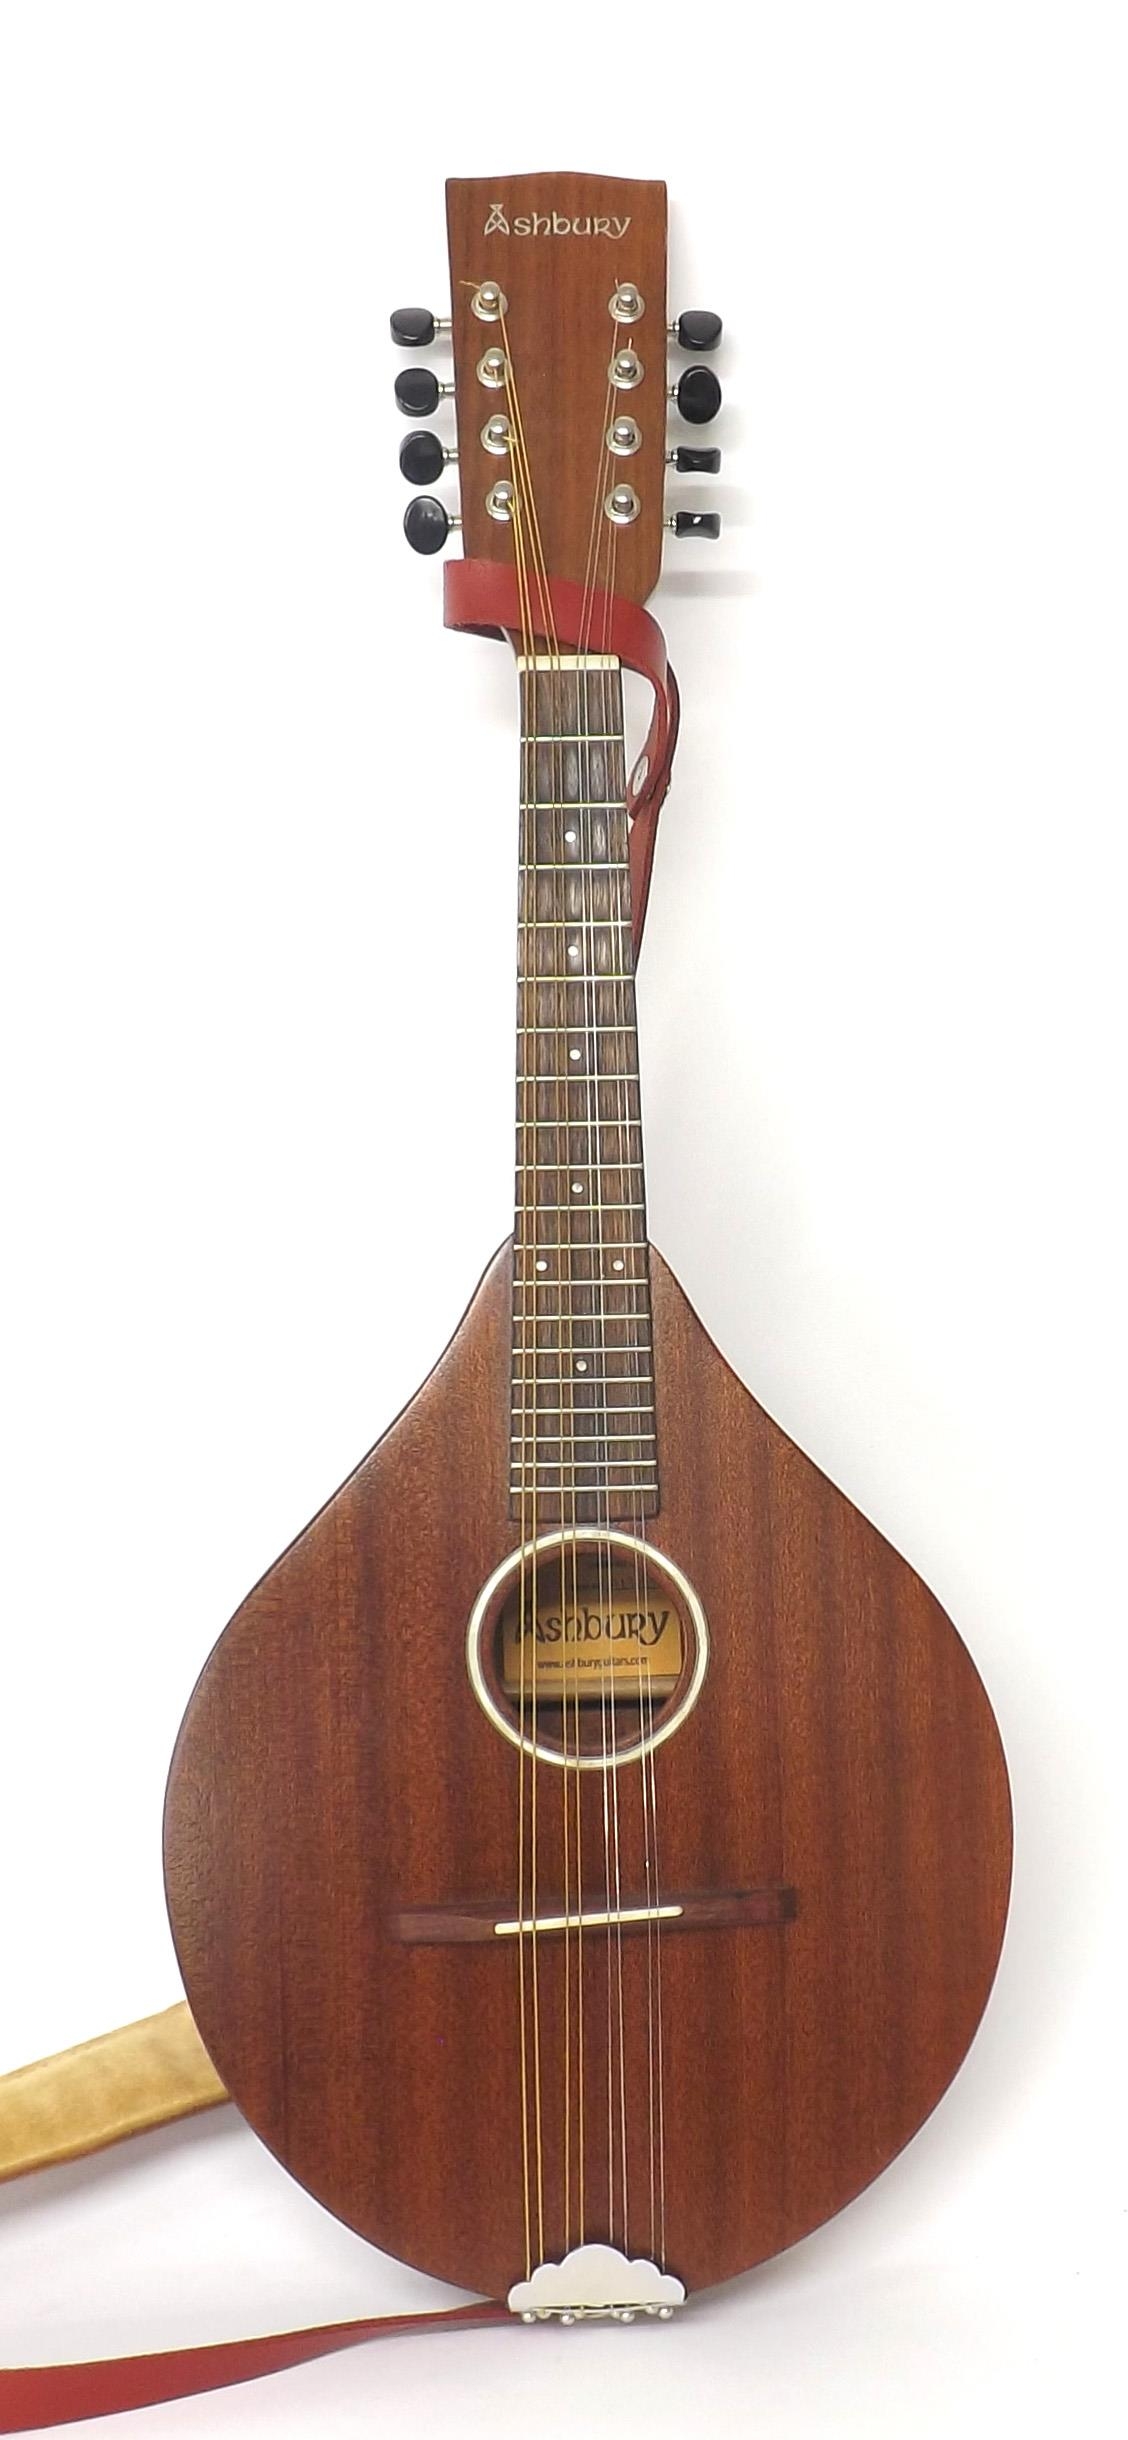 Contemporary mandolin by and labelled Ashbury, model no: AM130..., with pear shaped body and Ashbury